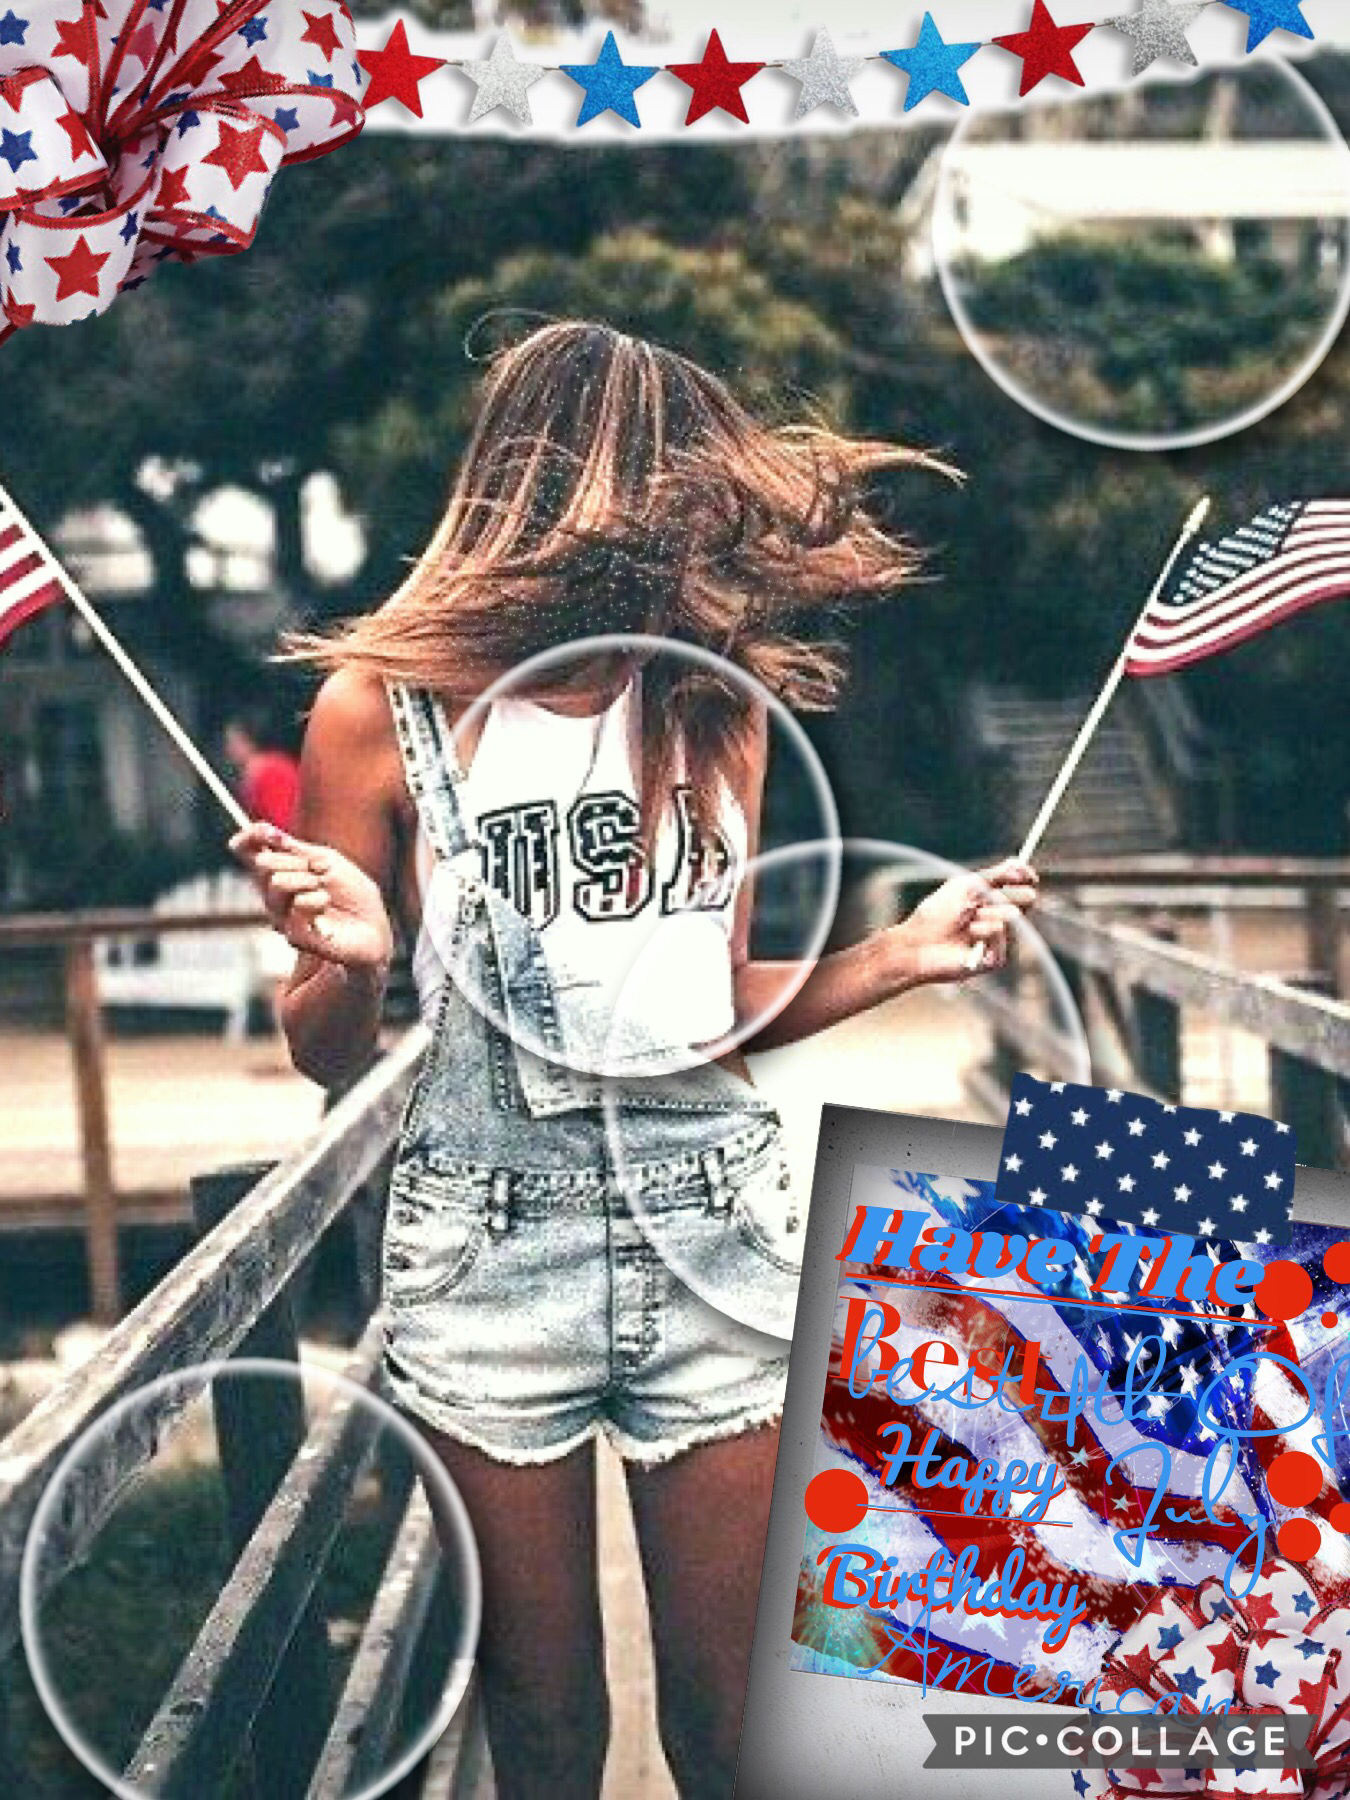 🇺🇸Tap🇺🇸
Happy 4th Of July Everyone I Hope You All Have A Wonderful Day I Will Not Be On Picollage For The Rest Of The Day So Sorry Everyone! But Tomorrow I Will Be Posting A Collage Of A New User Name I Am Getting A Little Tried Of The One I Have Now Bye 